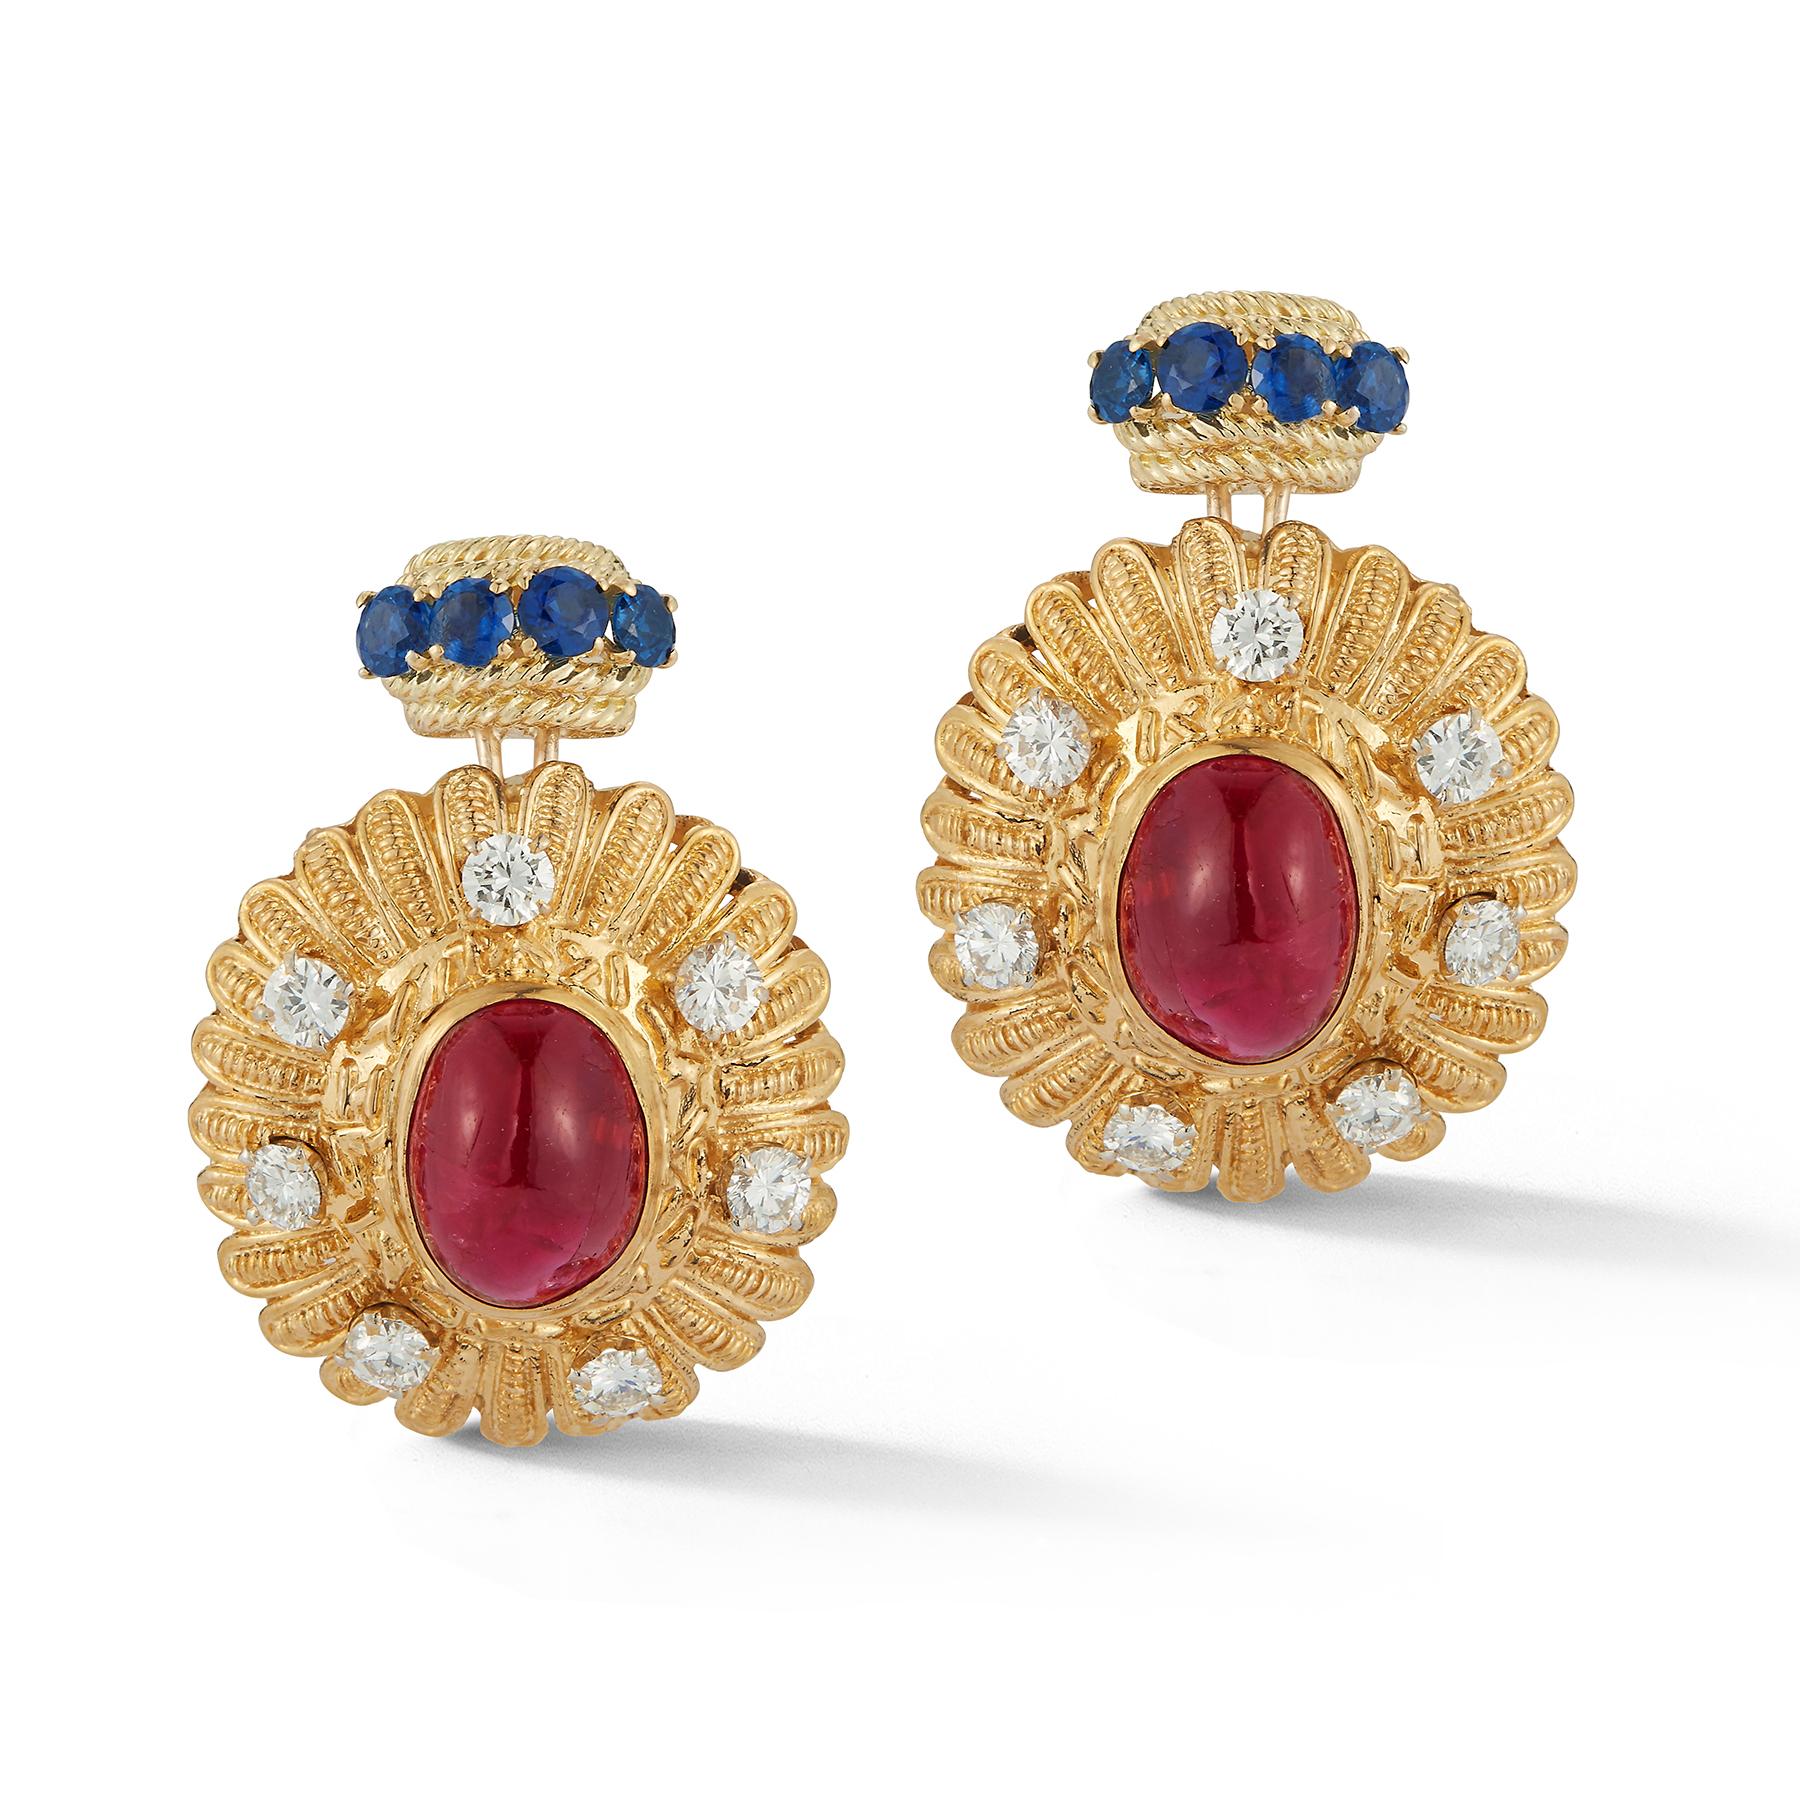 Cabochon Ruby, Sapphire & Diamond Earrings,
Circa 1965. 
2 cabochon rubies surrounded by 14 round diamond and 8 round cut sapphires 

Back Type: screw back 

Gold type: 18k yellow gold

Measurements: 1.5